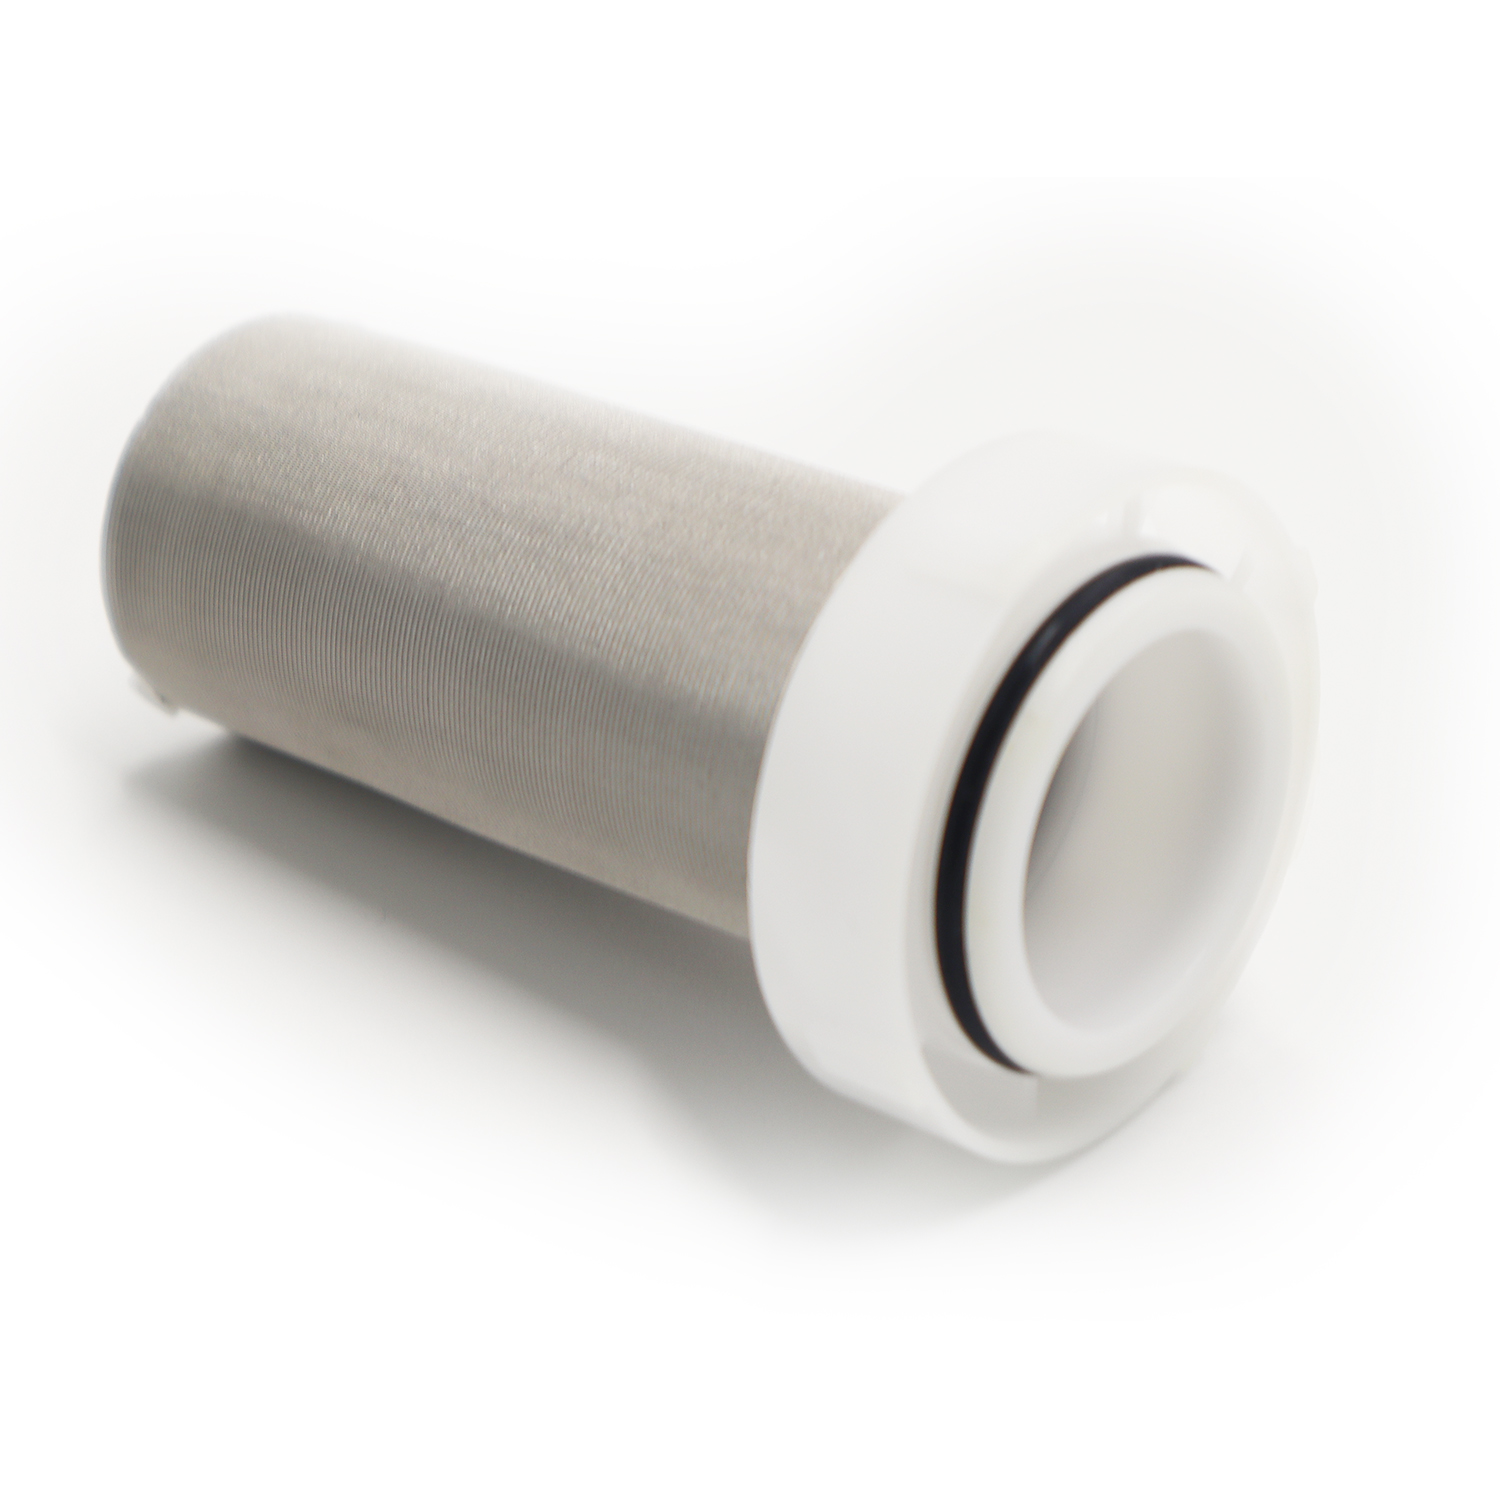 Q2 Spin Down Sediment Water Filter Replacement Cartridge，Vortopt